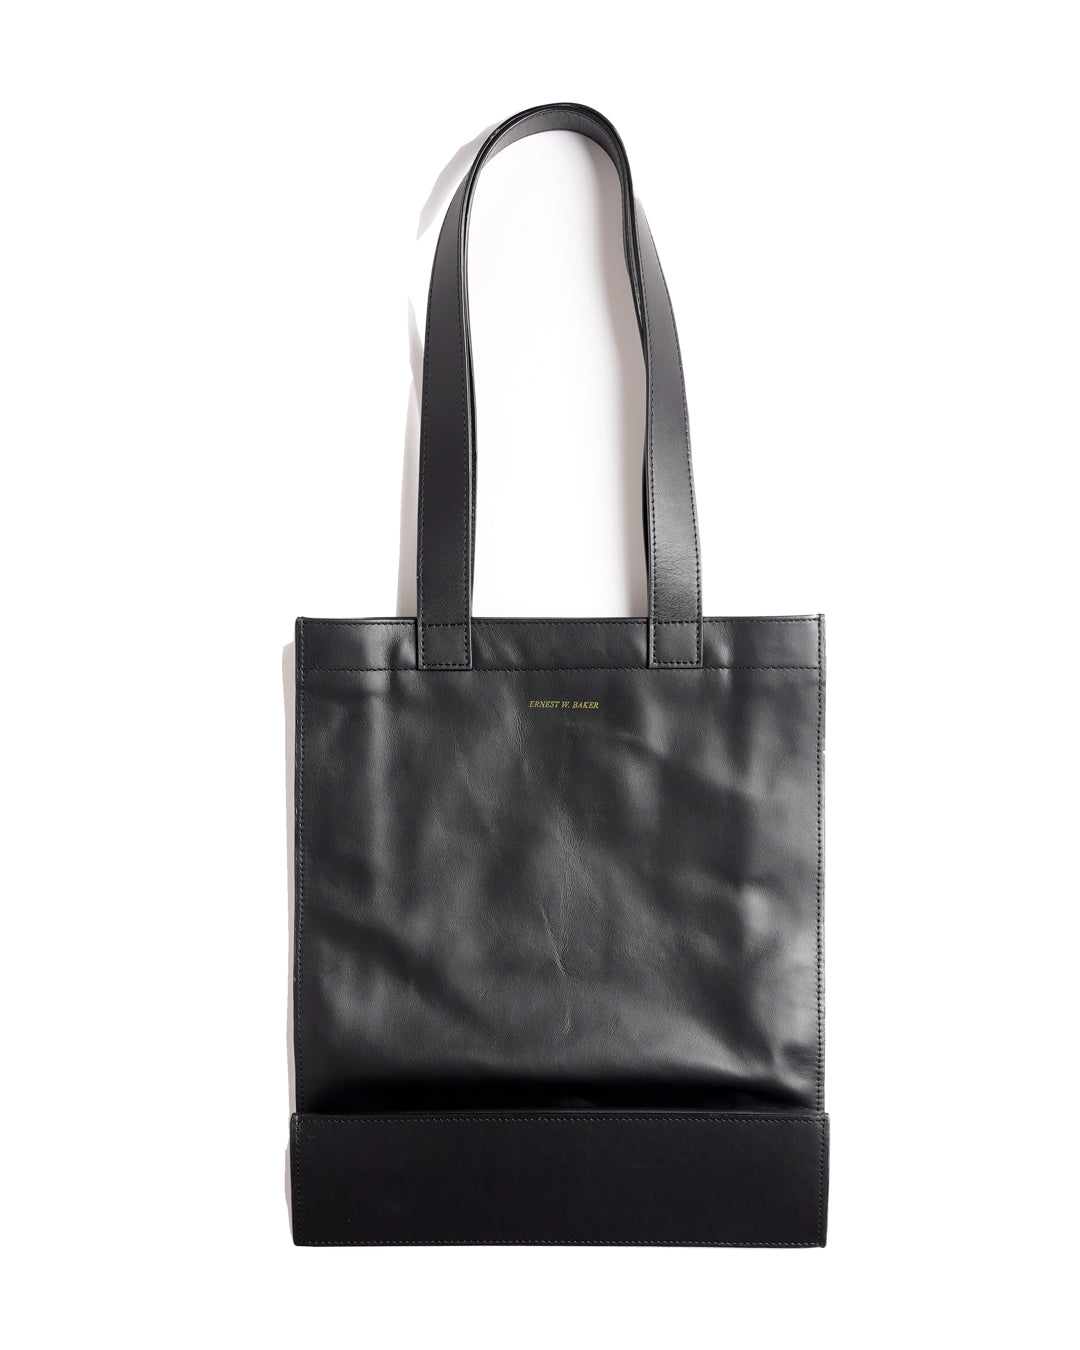 LEATHER TOTE BAG (BLK) *LAST - Baby's all right